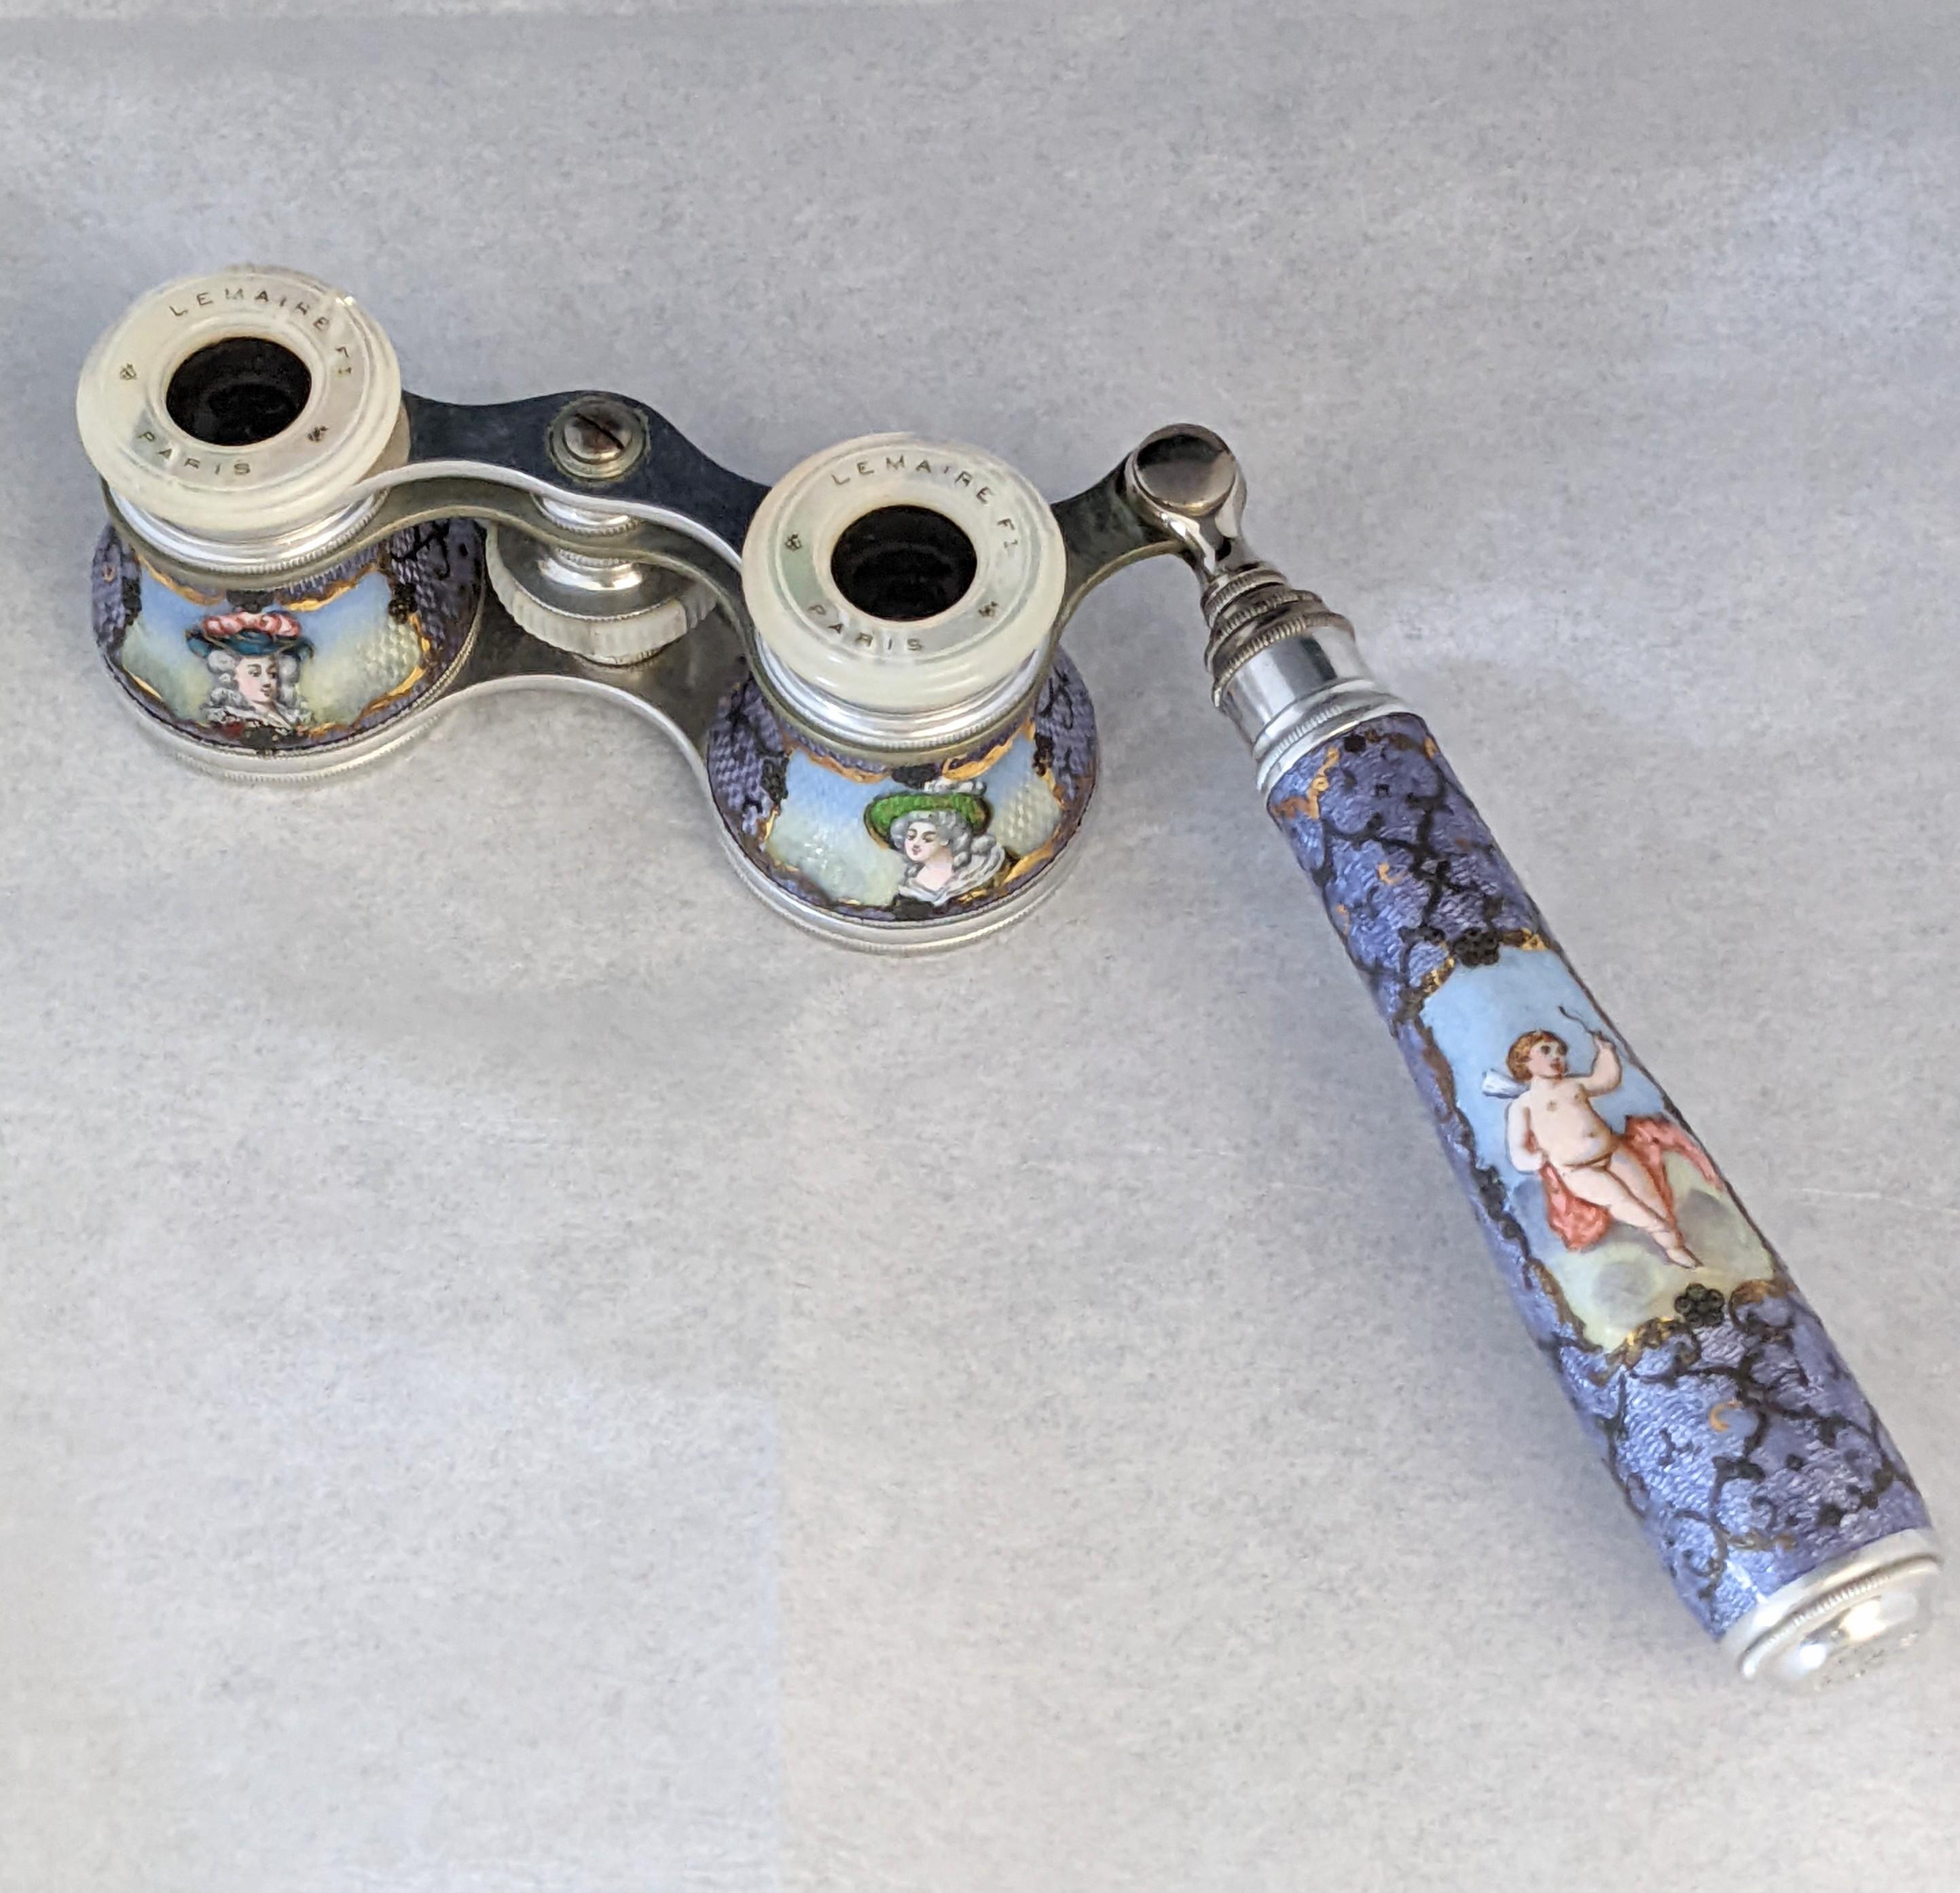 Lemaire Enamel Opera Glasses made in Paris circa 1930's with hand enamel painted 18th Century figures with a cupid on handle. Extremely beautifully painted on a lavender base with gold highlights. Eye pieces in Mother of Pearl with the Lemaire,